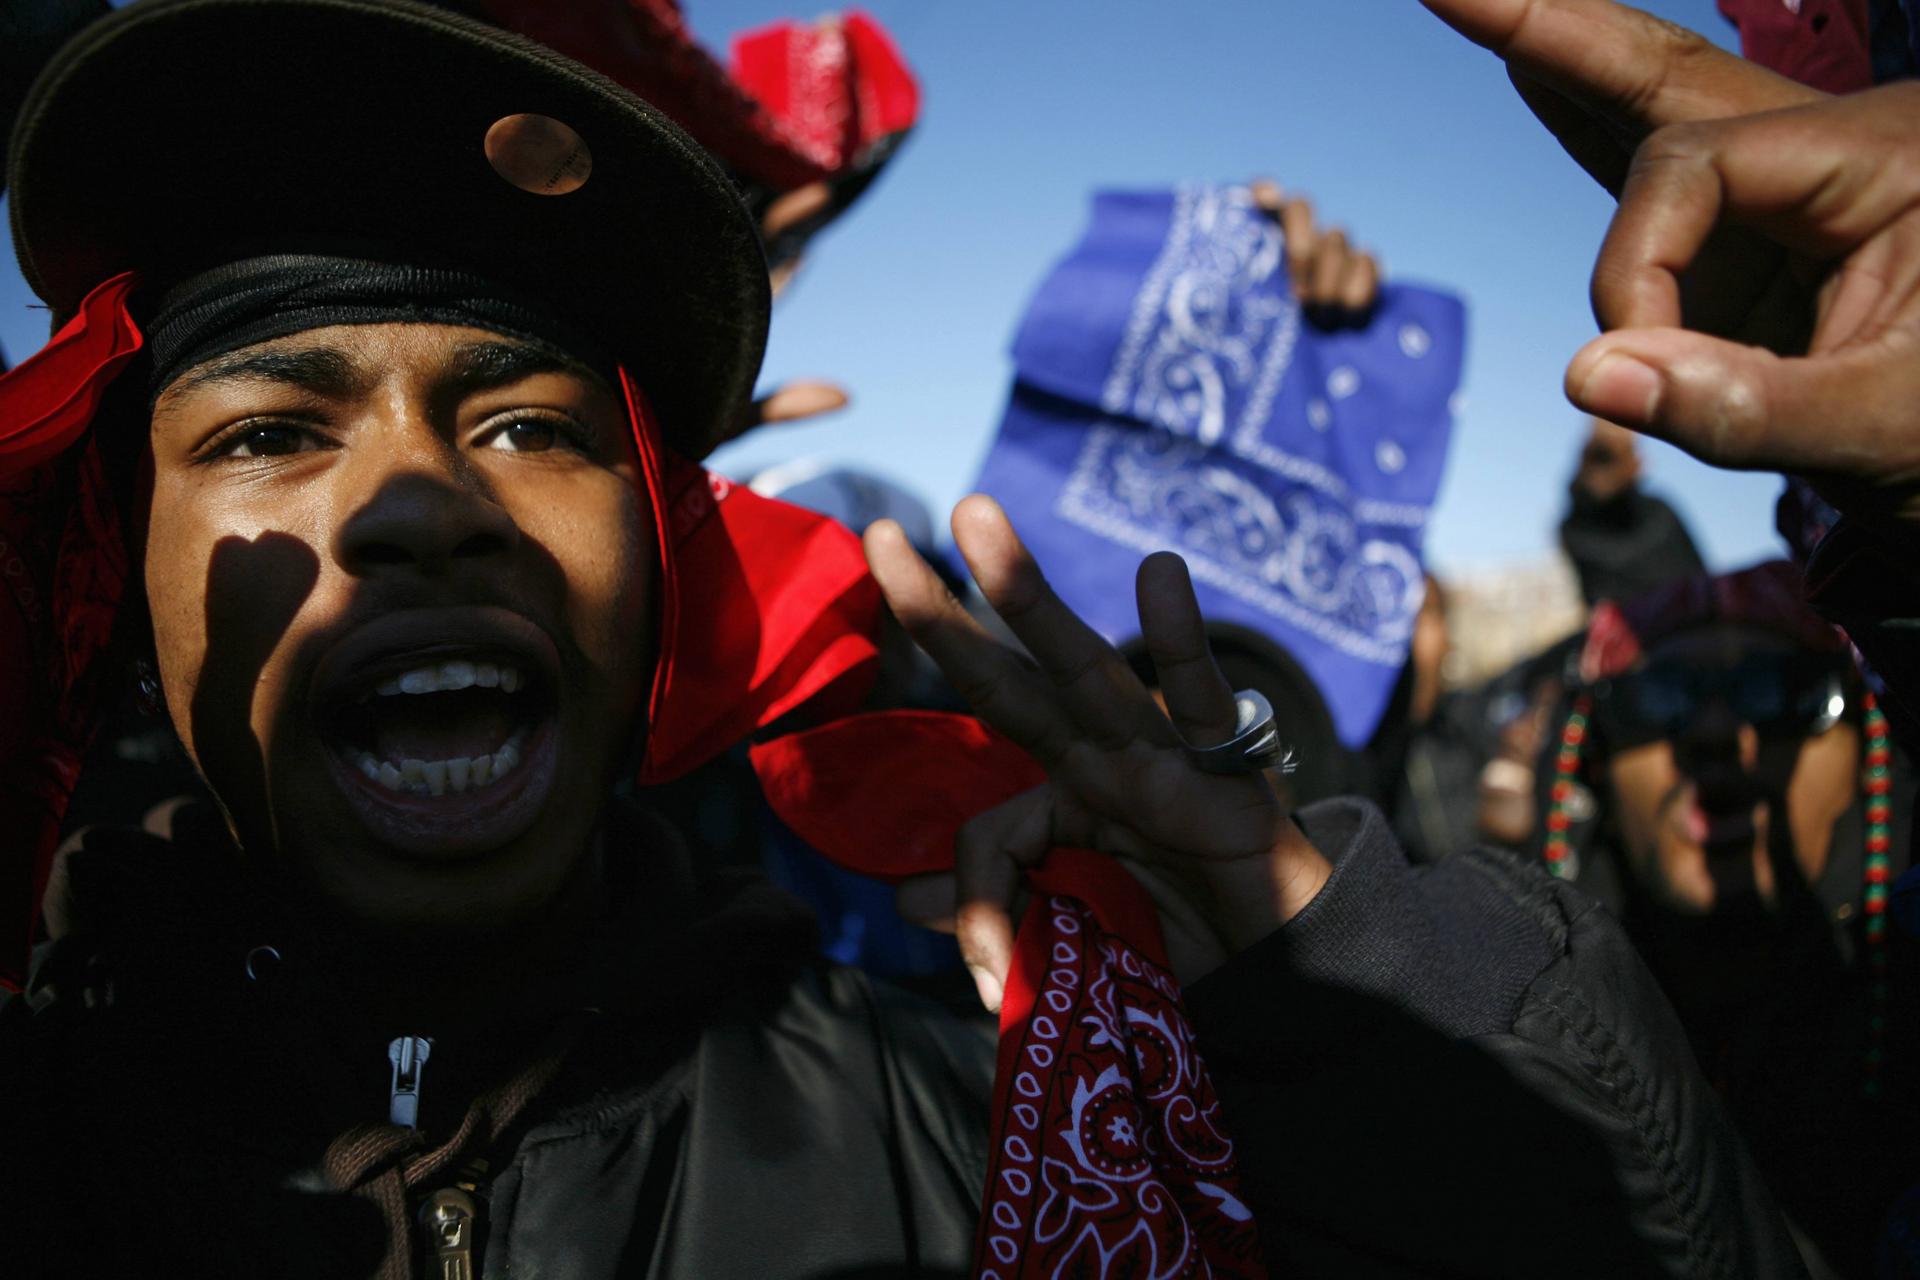 Crips and Bloods unite at a rally in New York against the shooting of Sean Bell, who was killed by police on his wedding day. Photo: Reuters